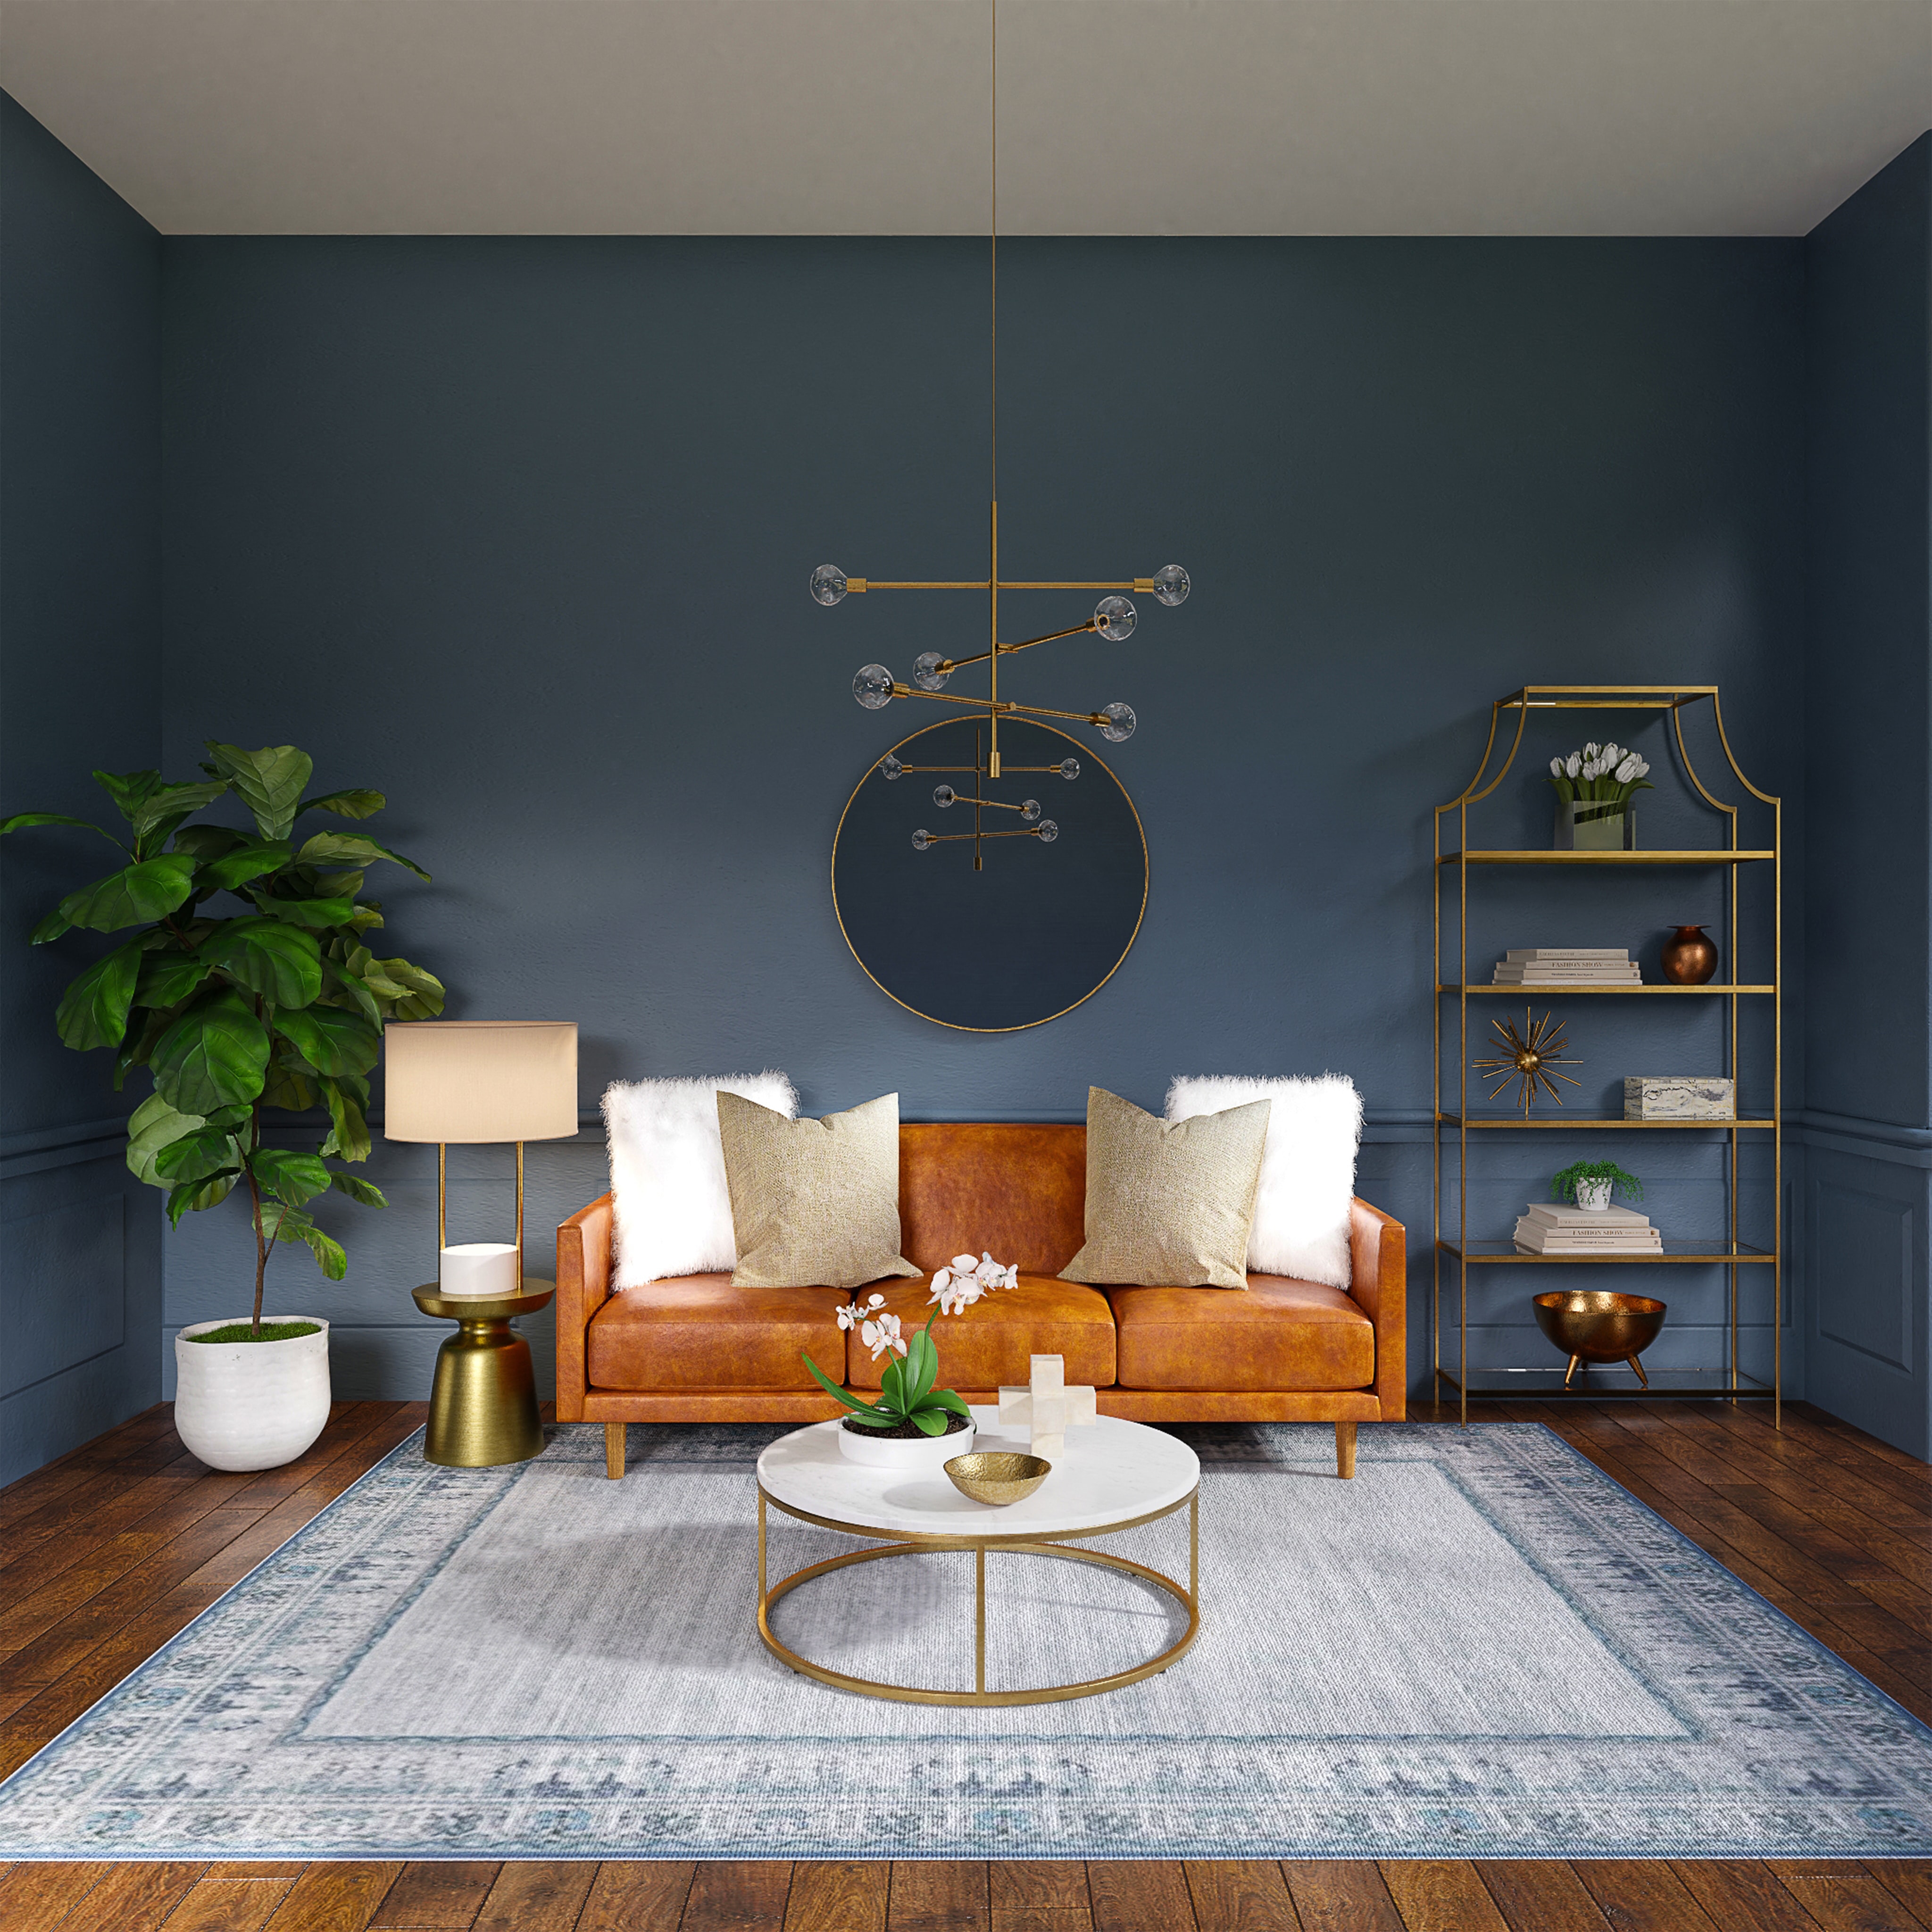 Living room with gray blue walls